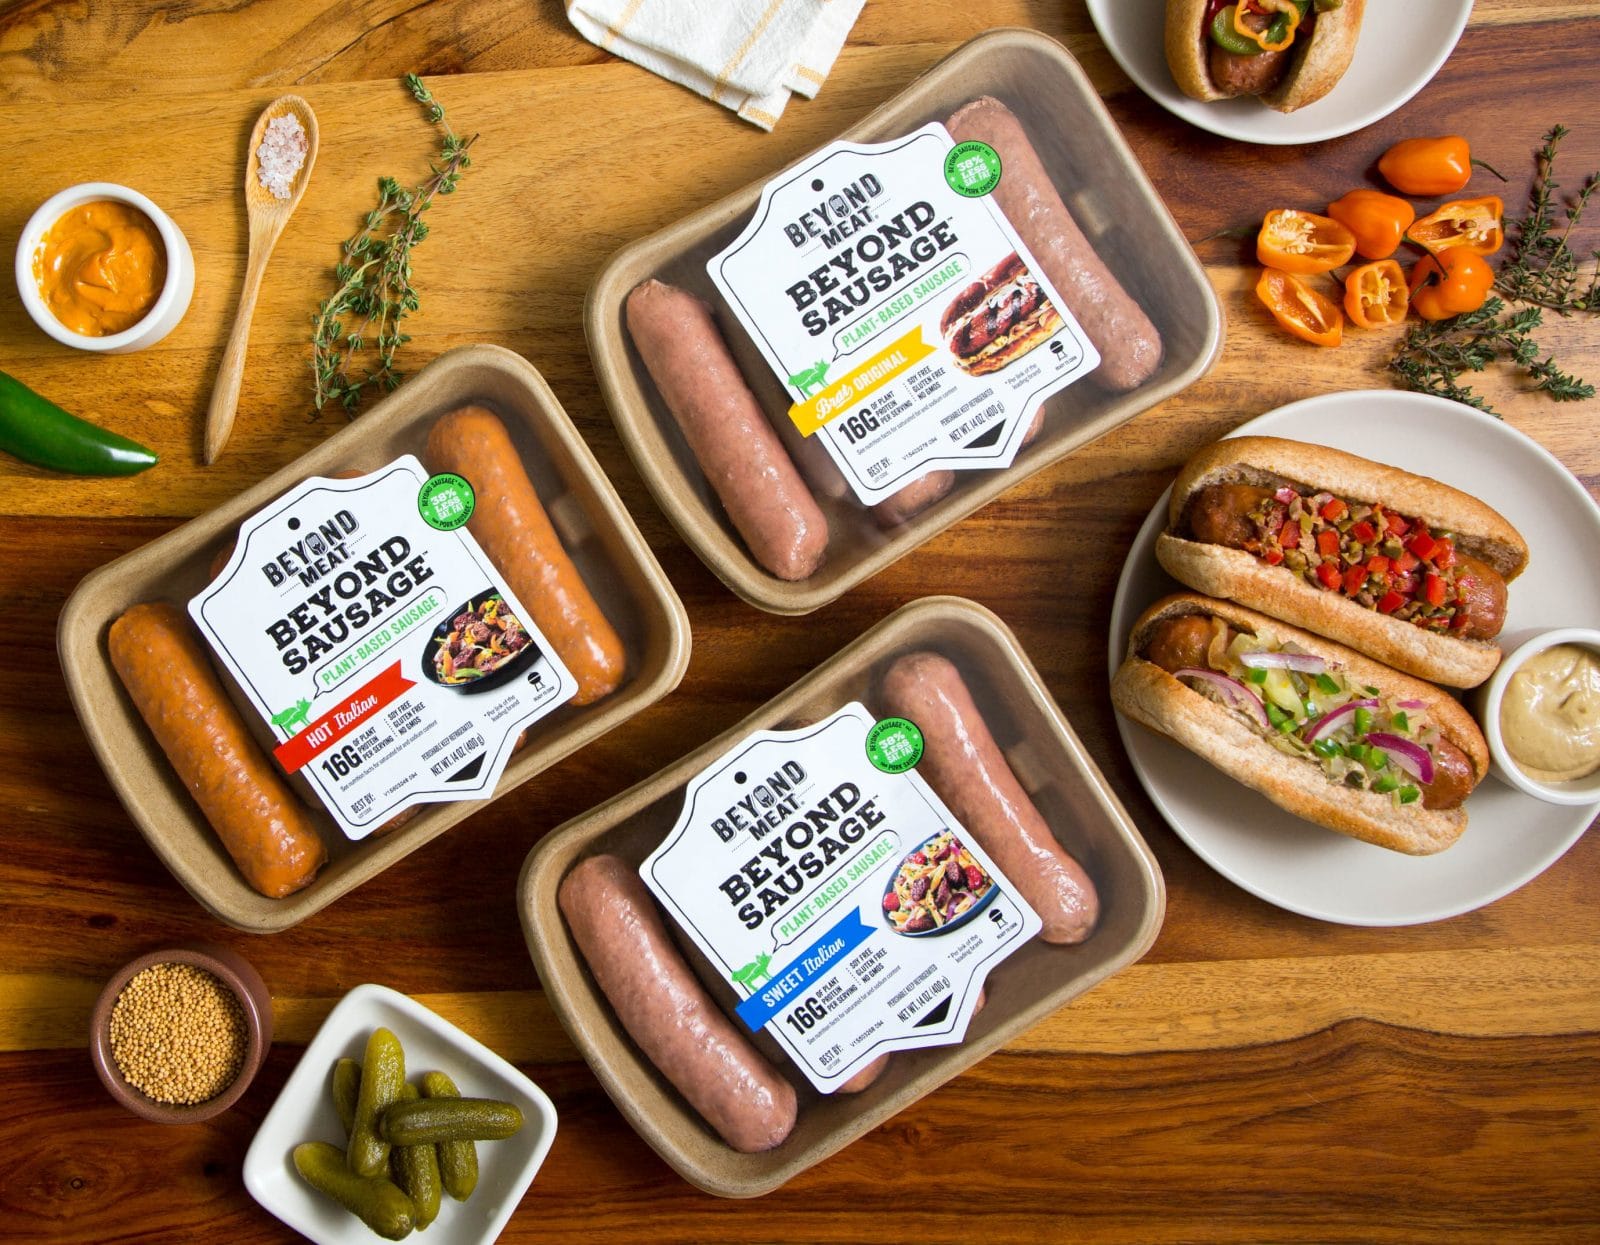 Beyond Meat Opens Second Facility, Hires Hundreds to Keep Up With Demand ChooseVeg